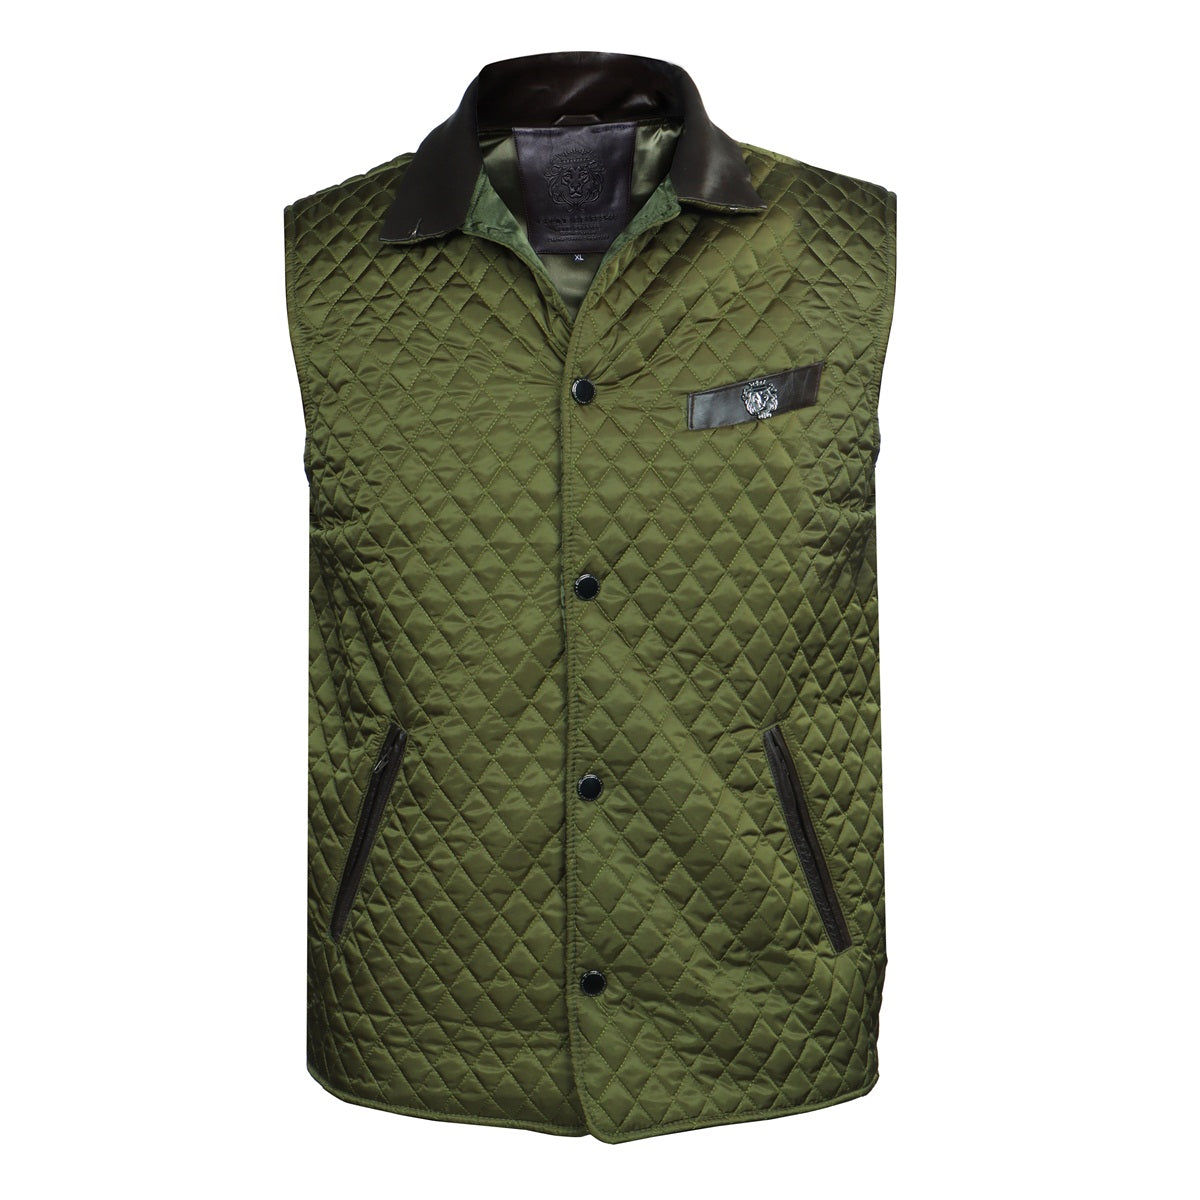 Diamond Stitched Green Puffer Vest With Black Leather Trims Collar & Pockets by Brune & Bareskin